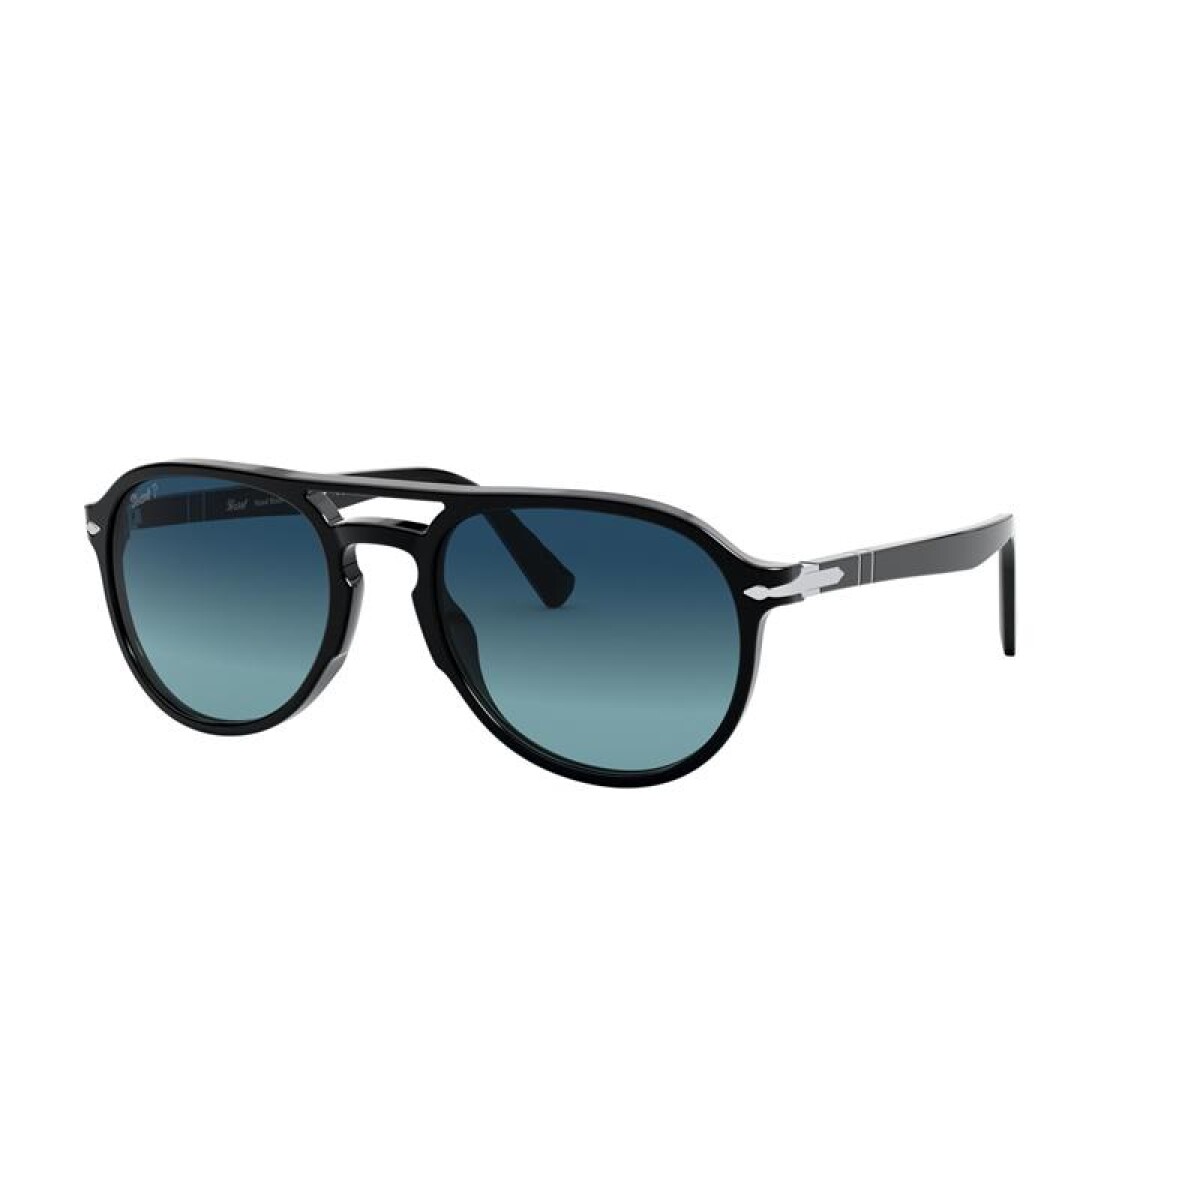 Persol 3235-s - 95/s3 